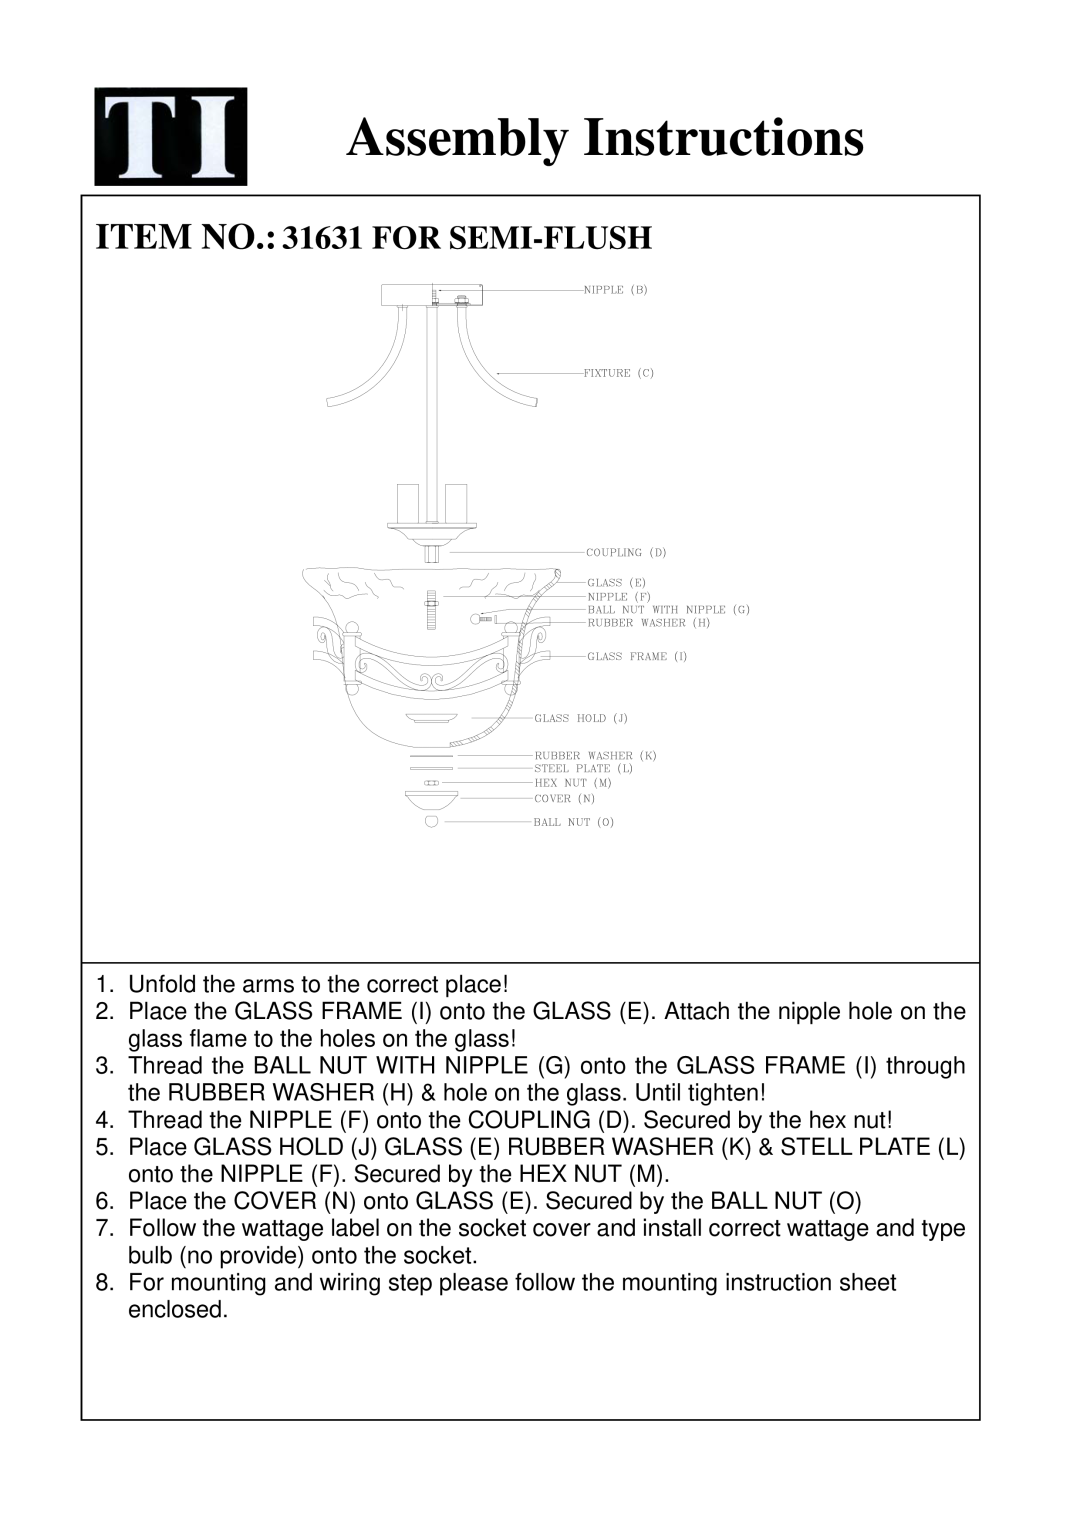 Triarch instruction sheet Assembly Instructions, ITEM NO. 31631 FOR SEMI-FLUSH 